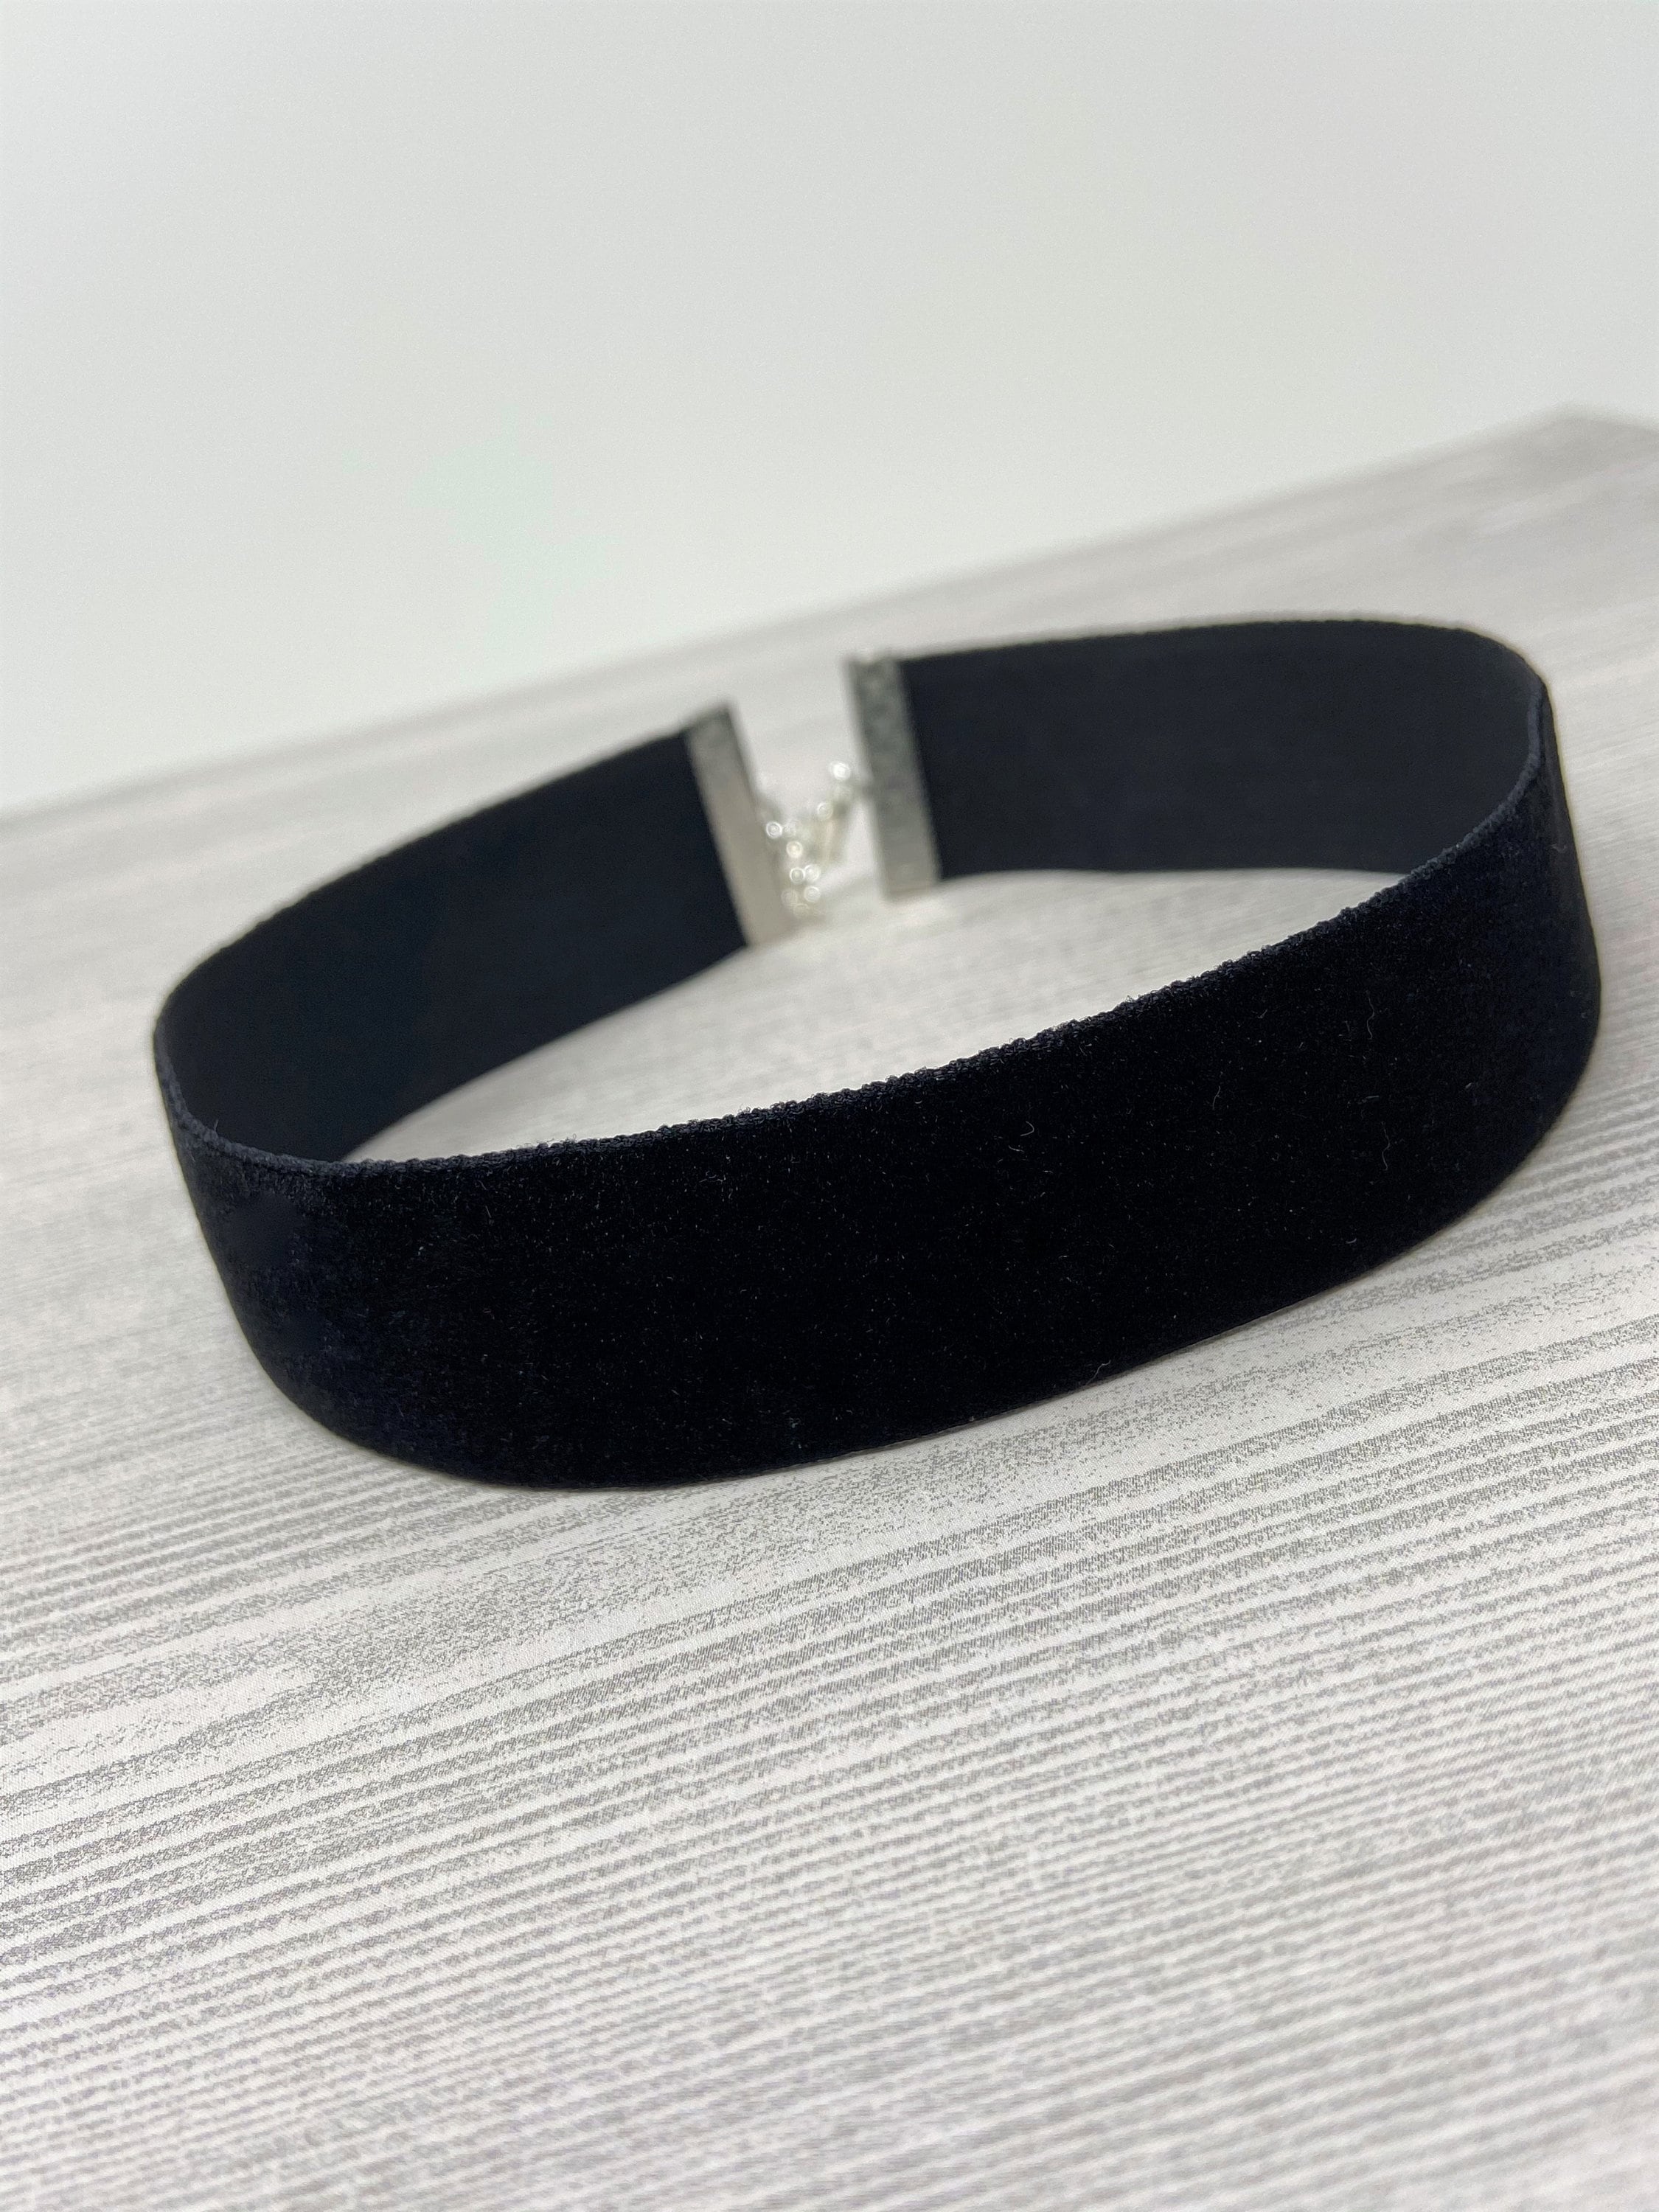 Black Choker - Reversible Faux Leather & Suede or Velvet - 20mm Thick - Customizable